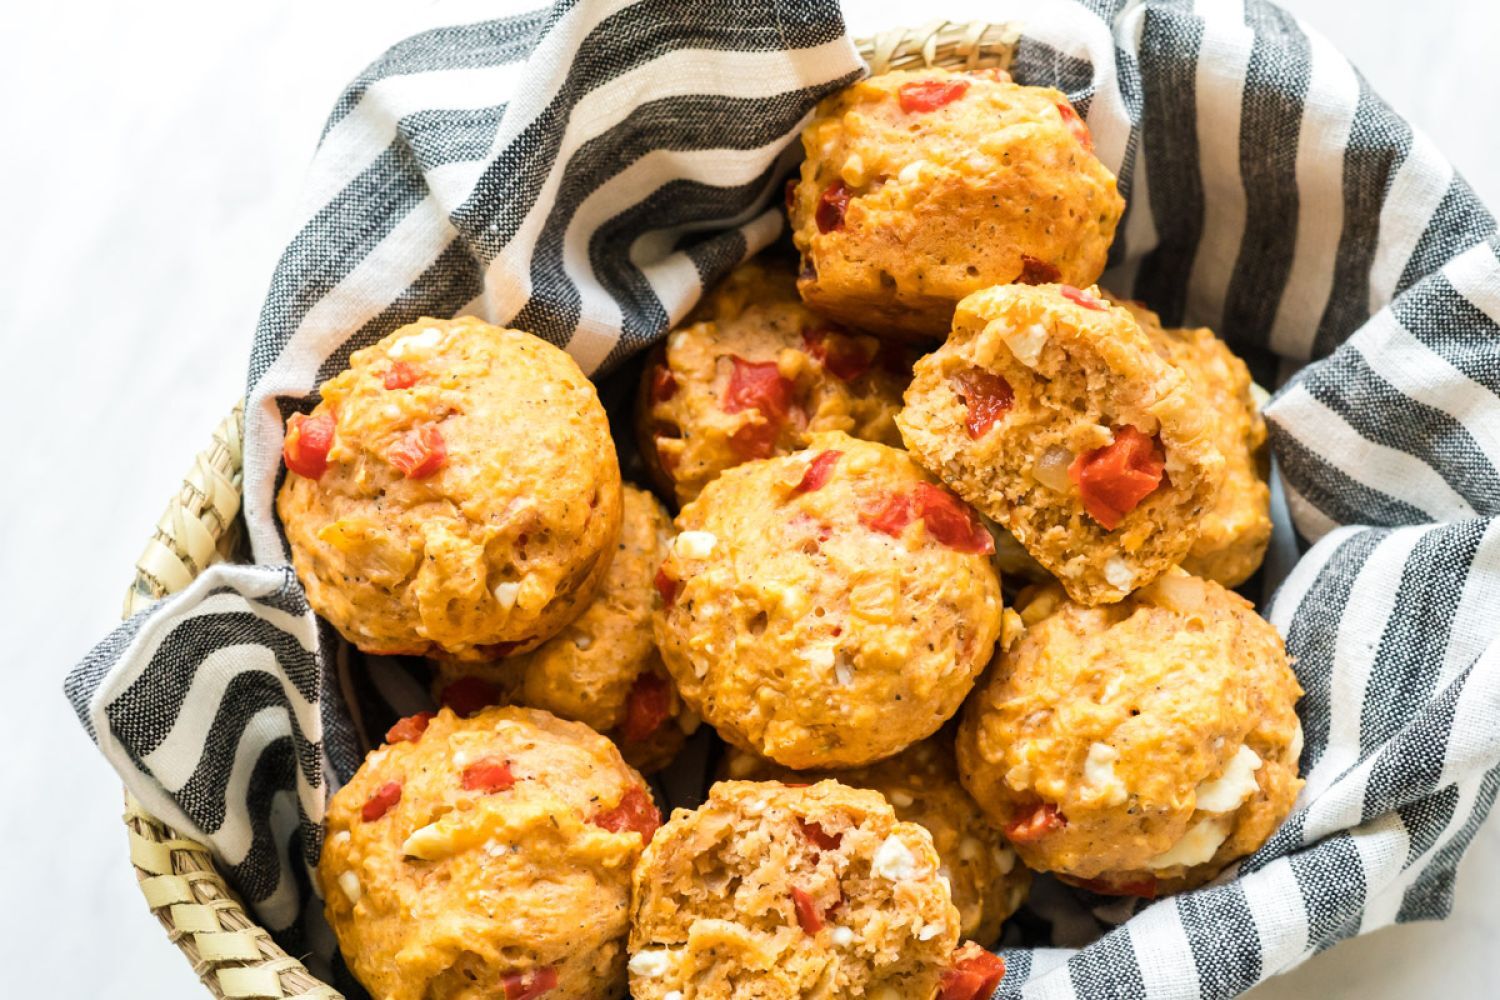 Savory feta cheese muffins with red peppers and feta crumbles served in a basket.